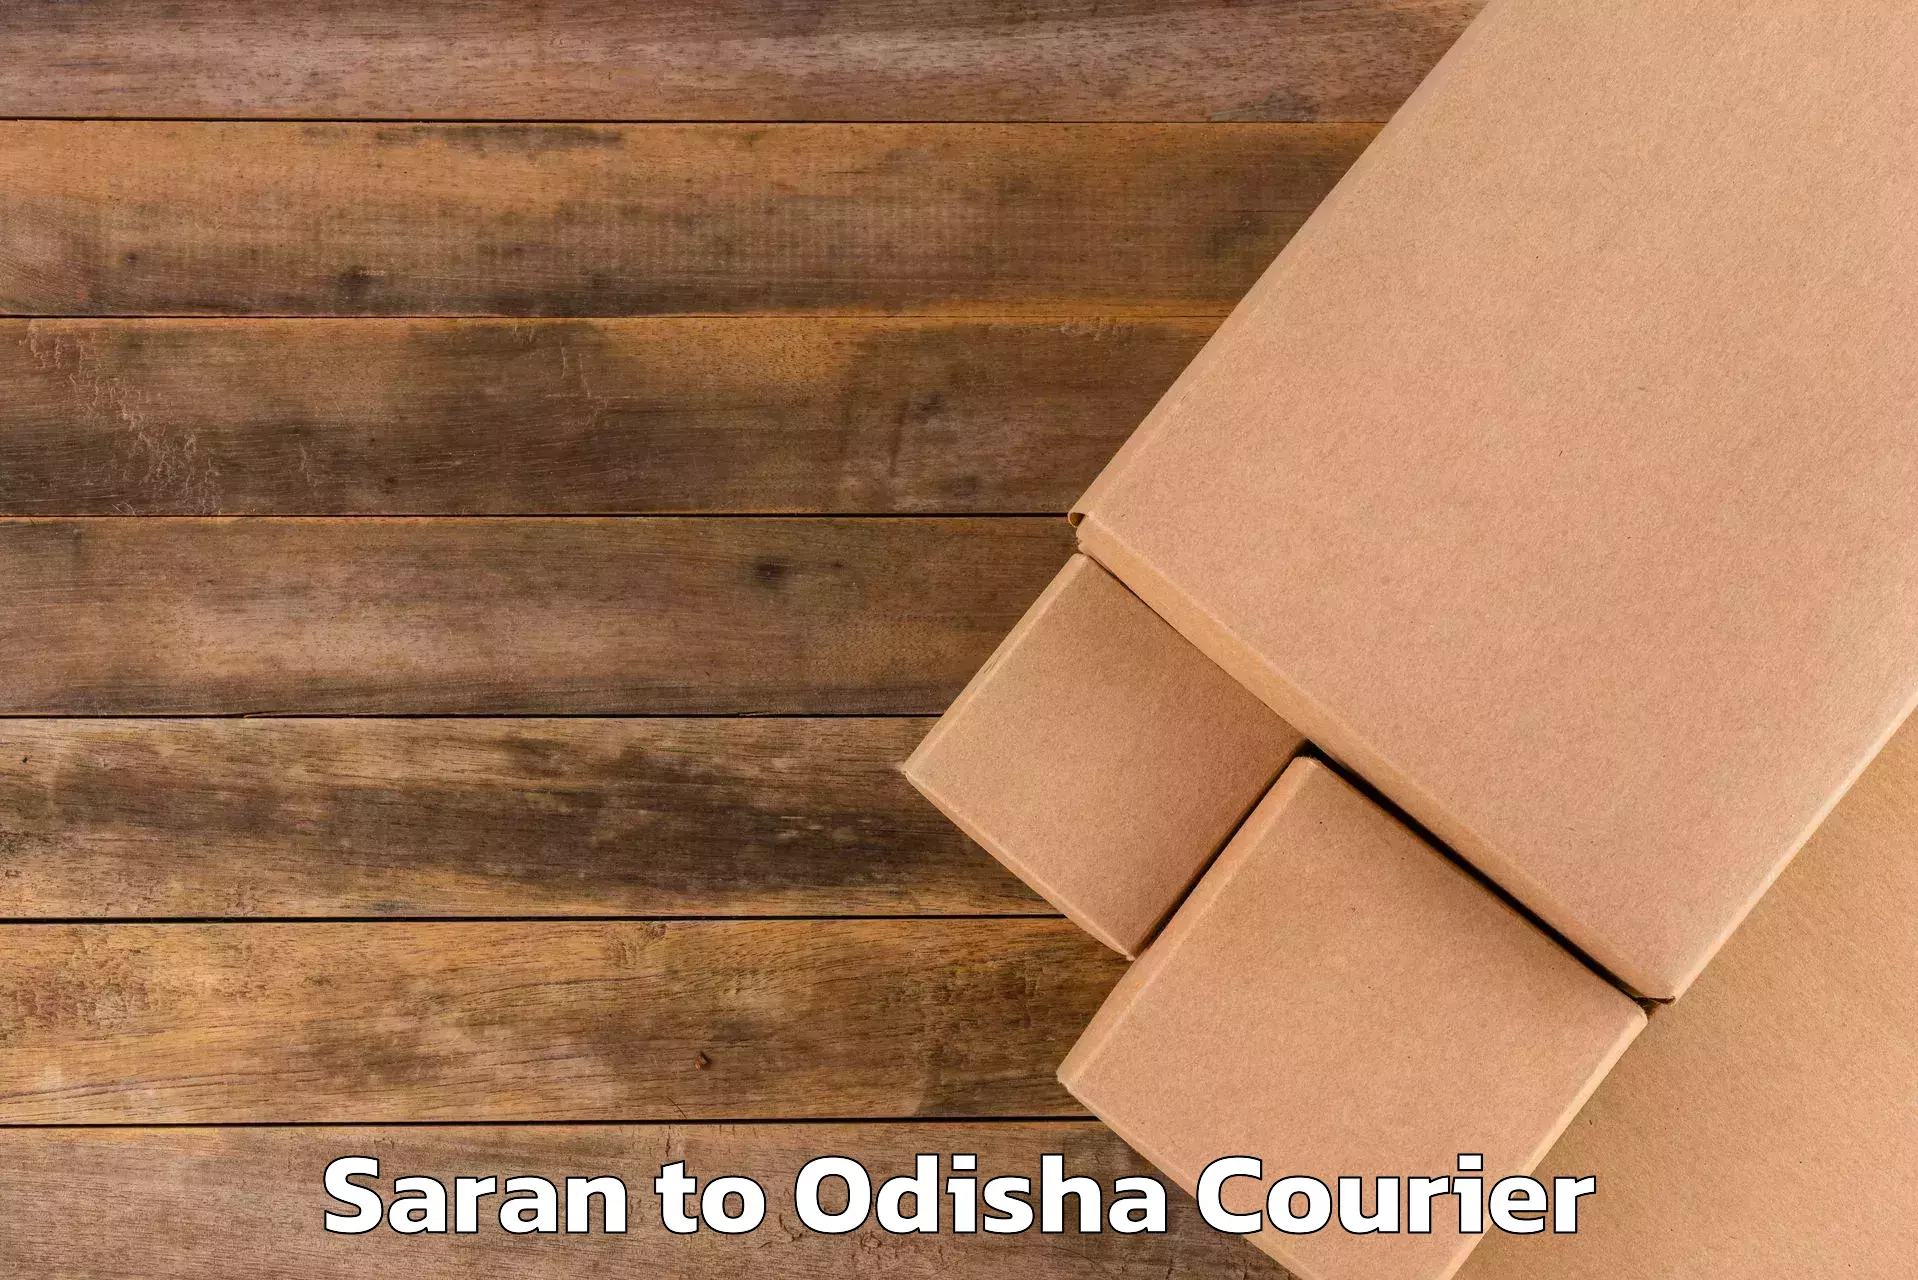 Personal effects shipping in Saran to Cuttack